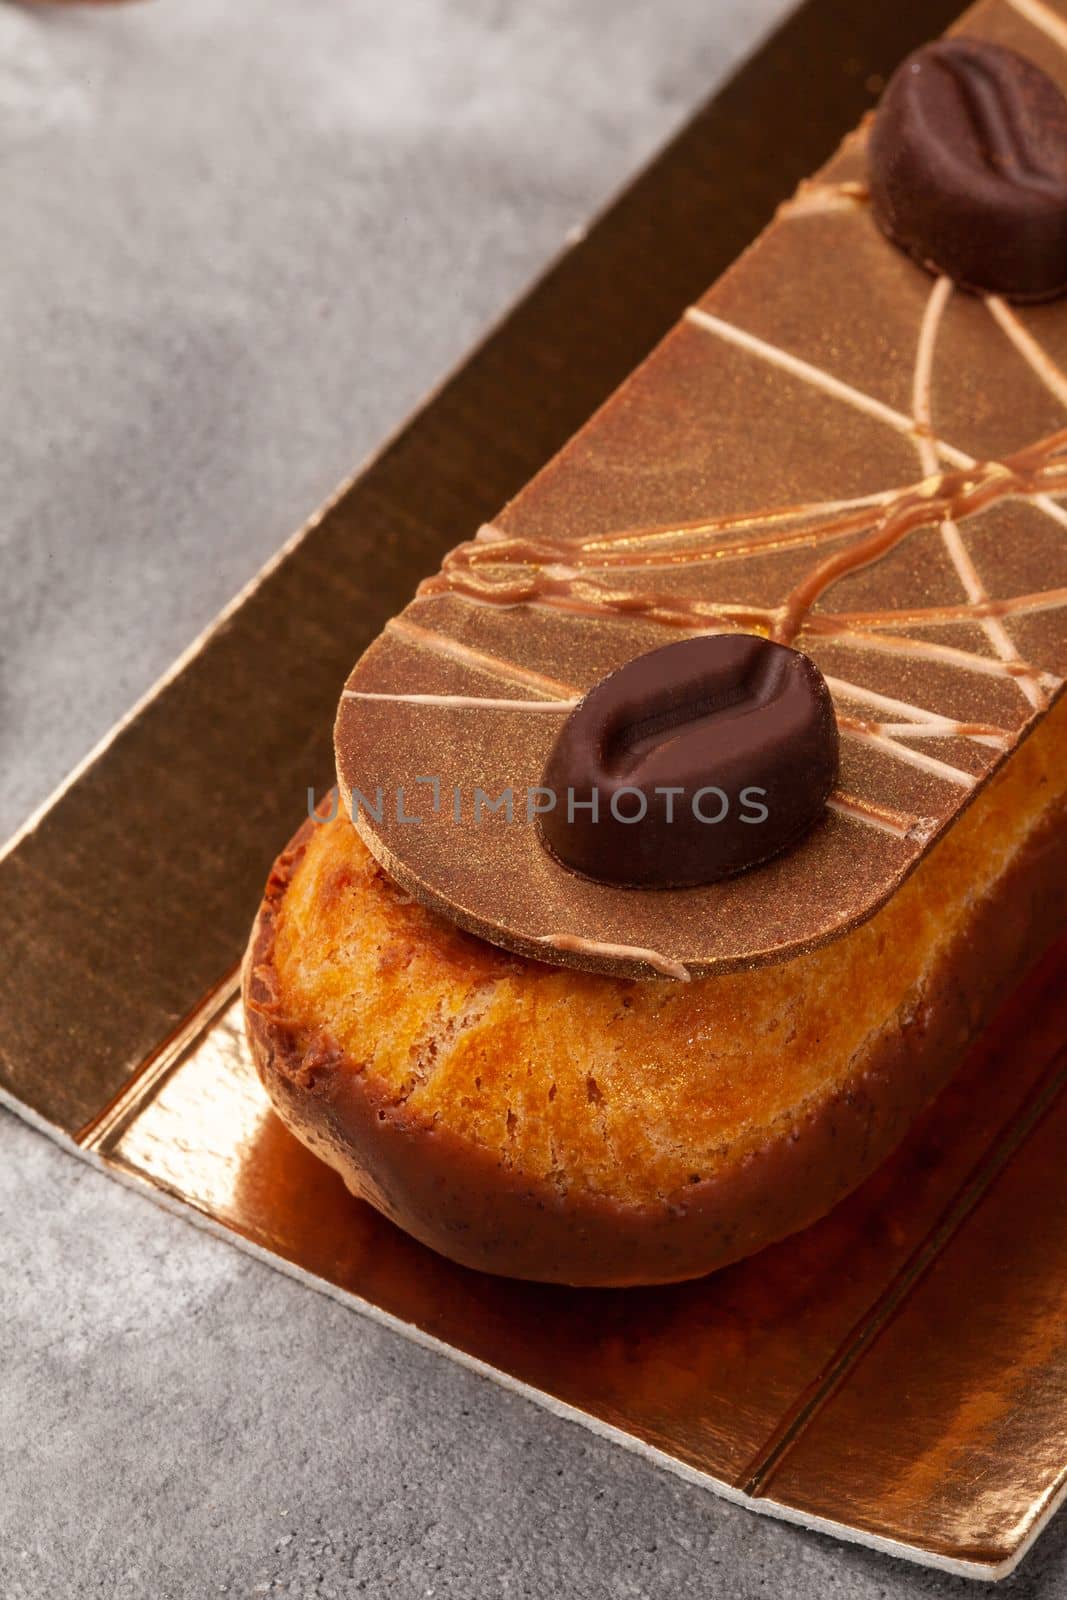 Closeup of appetizing eclair with custard filling, chocolate icing and chocolate coffee beans on gold cardboard on gray background, cropped shot. Traditional French choux dough pastry